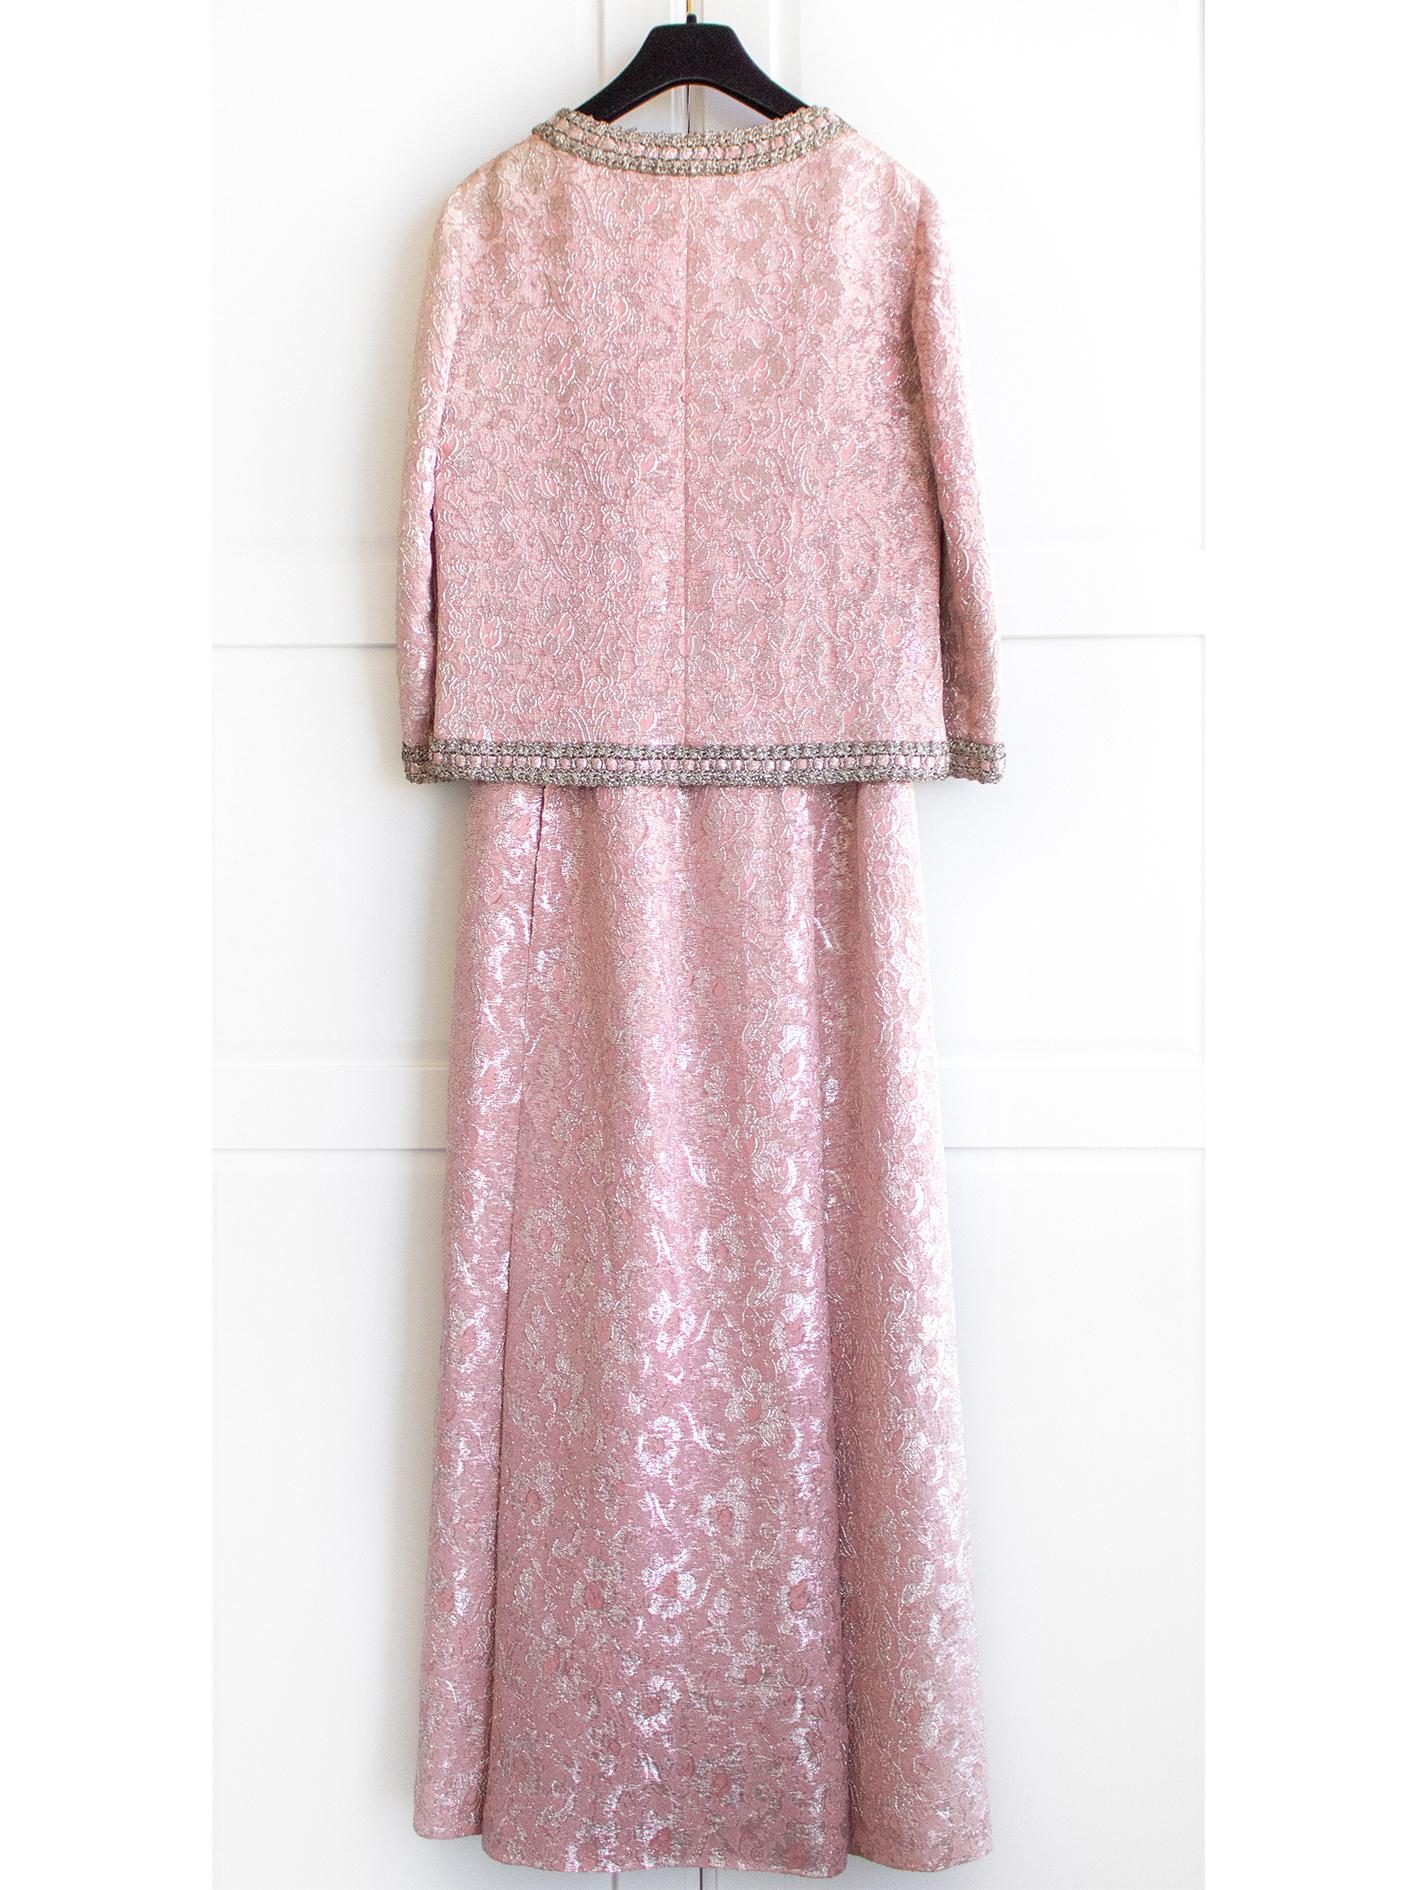 Women's Chanel Vintage Haute Couture 1960s Pink Silver Braided Brocade Jacket Skirt Suit